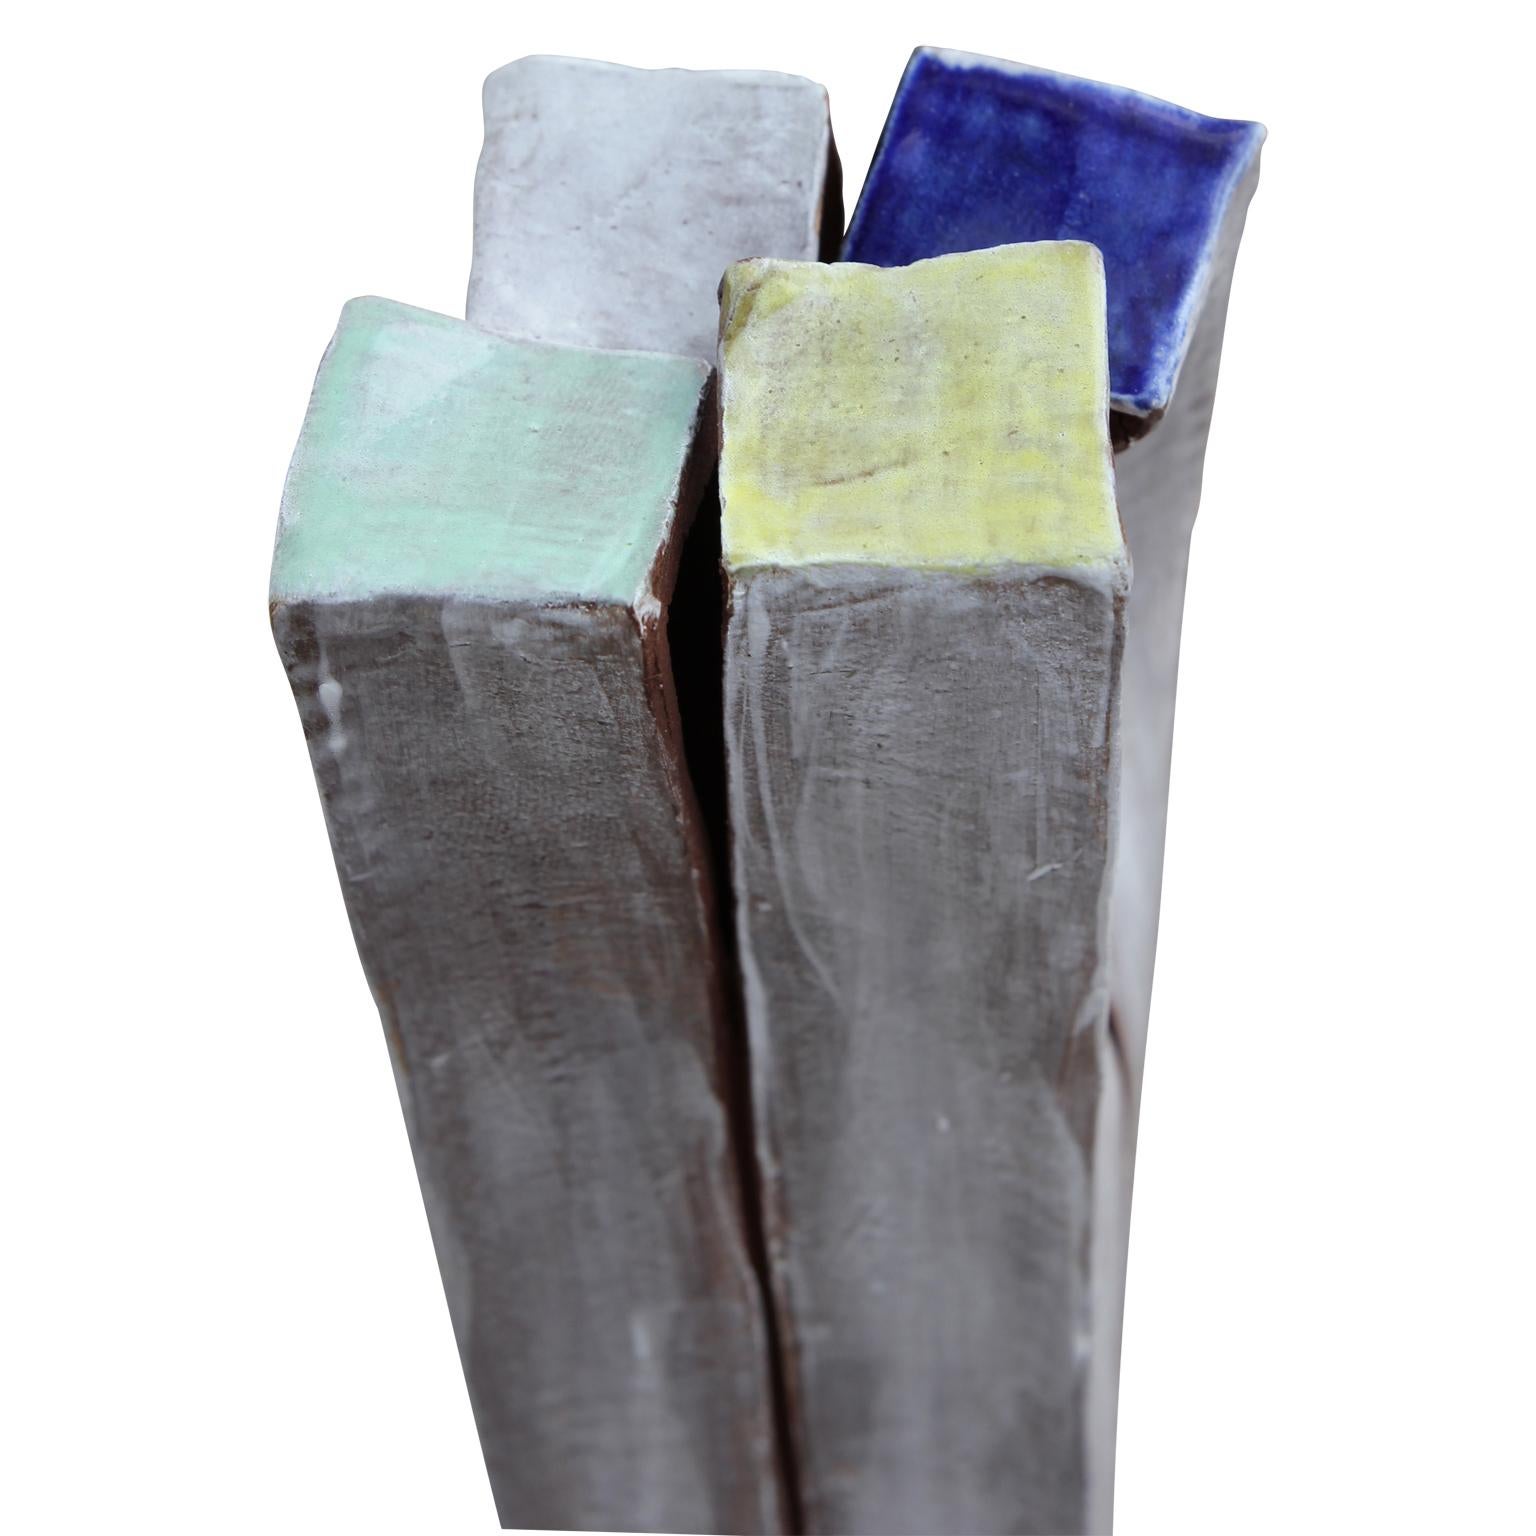 Minimalist style distressed glazed ceramic box created by Houston Contemporary artist Josefina Barassi who is apart of the Glassel School of Art in Houston Texas. She intentionally creates her boxes to look torn open or falling in on itself. The